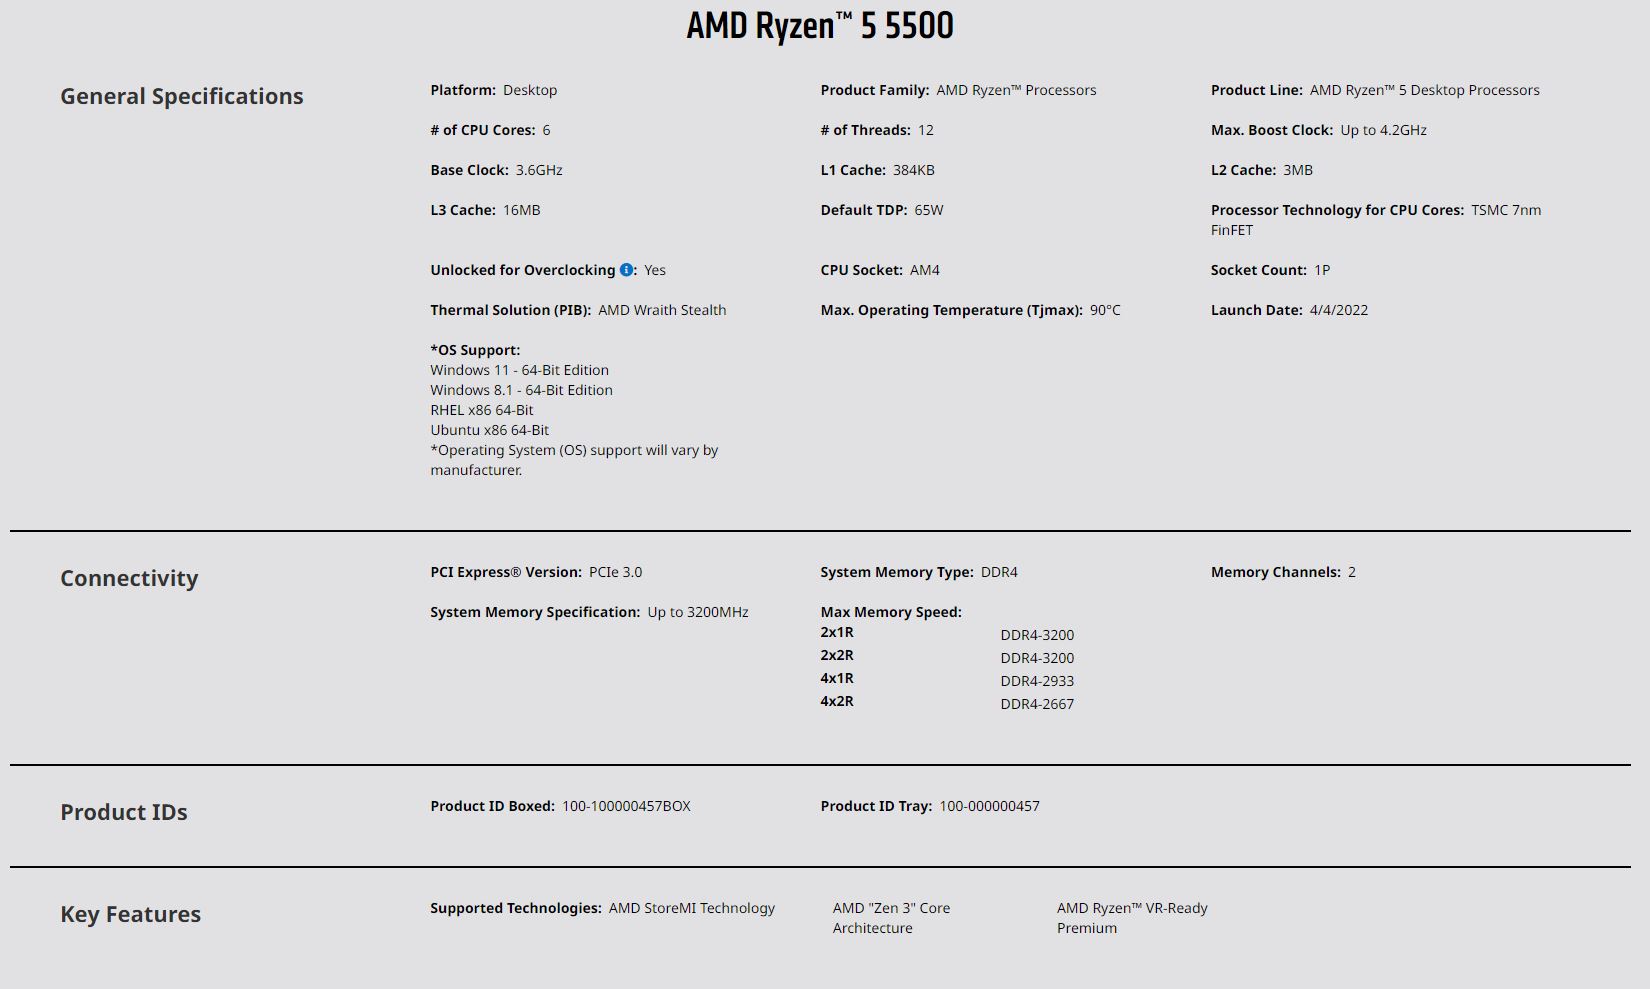 A large marketing image providing additional information about the product AMD Ryzen 5 5500 6 Core 12 Thread Up To 4.2Ghz AM4 - With Wraith Stealth Cooler - Additional alt info not provided